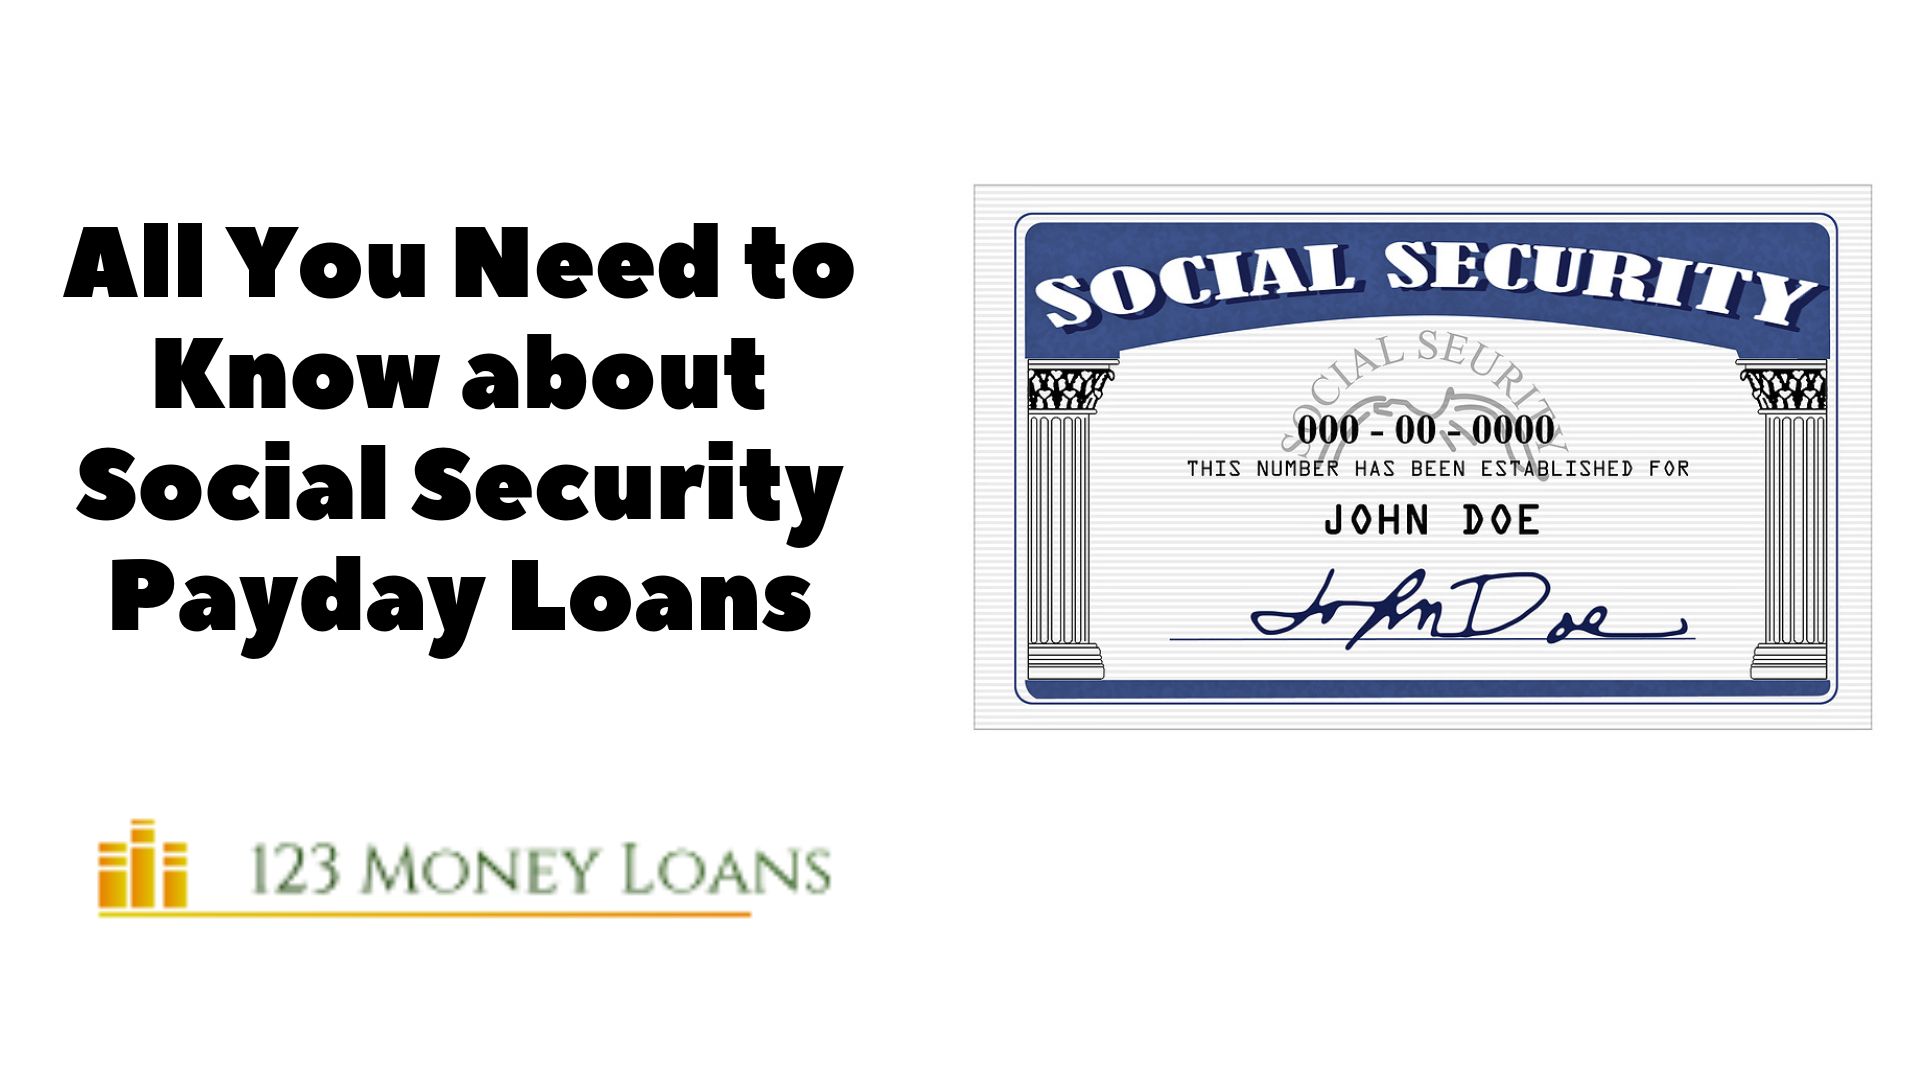 All You Need to Know about Social Security Payday Loans